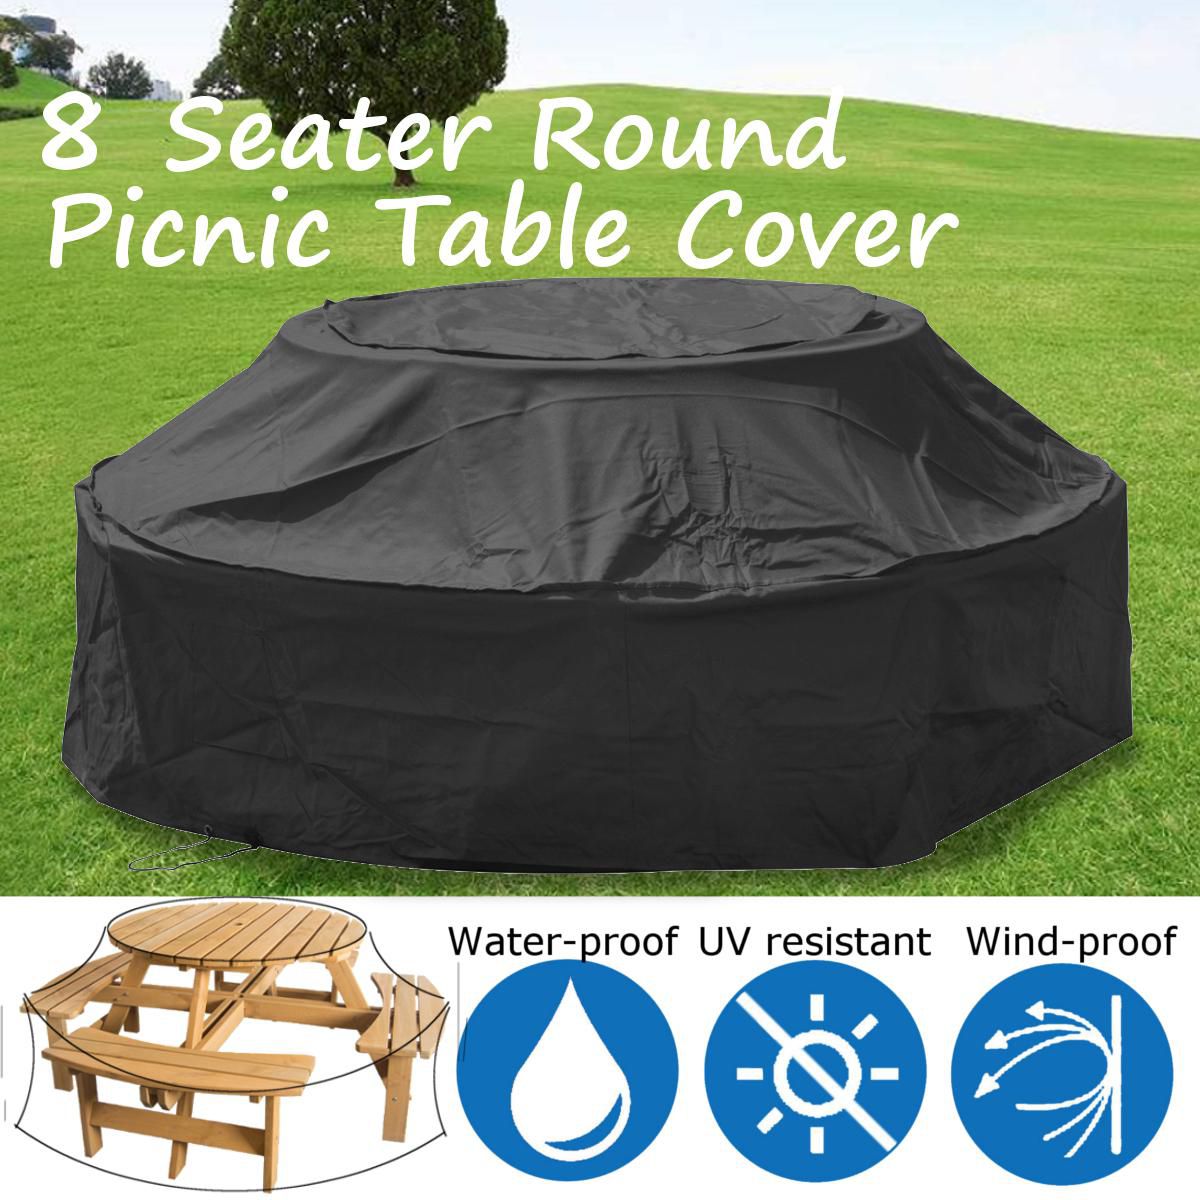 Buy 8 Seater Round Picnic Table Cover Vinyl Waterproof Patio Outdoor